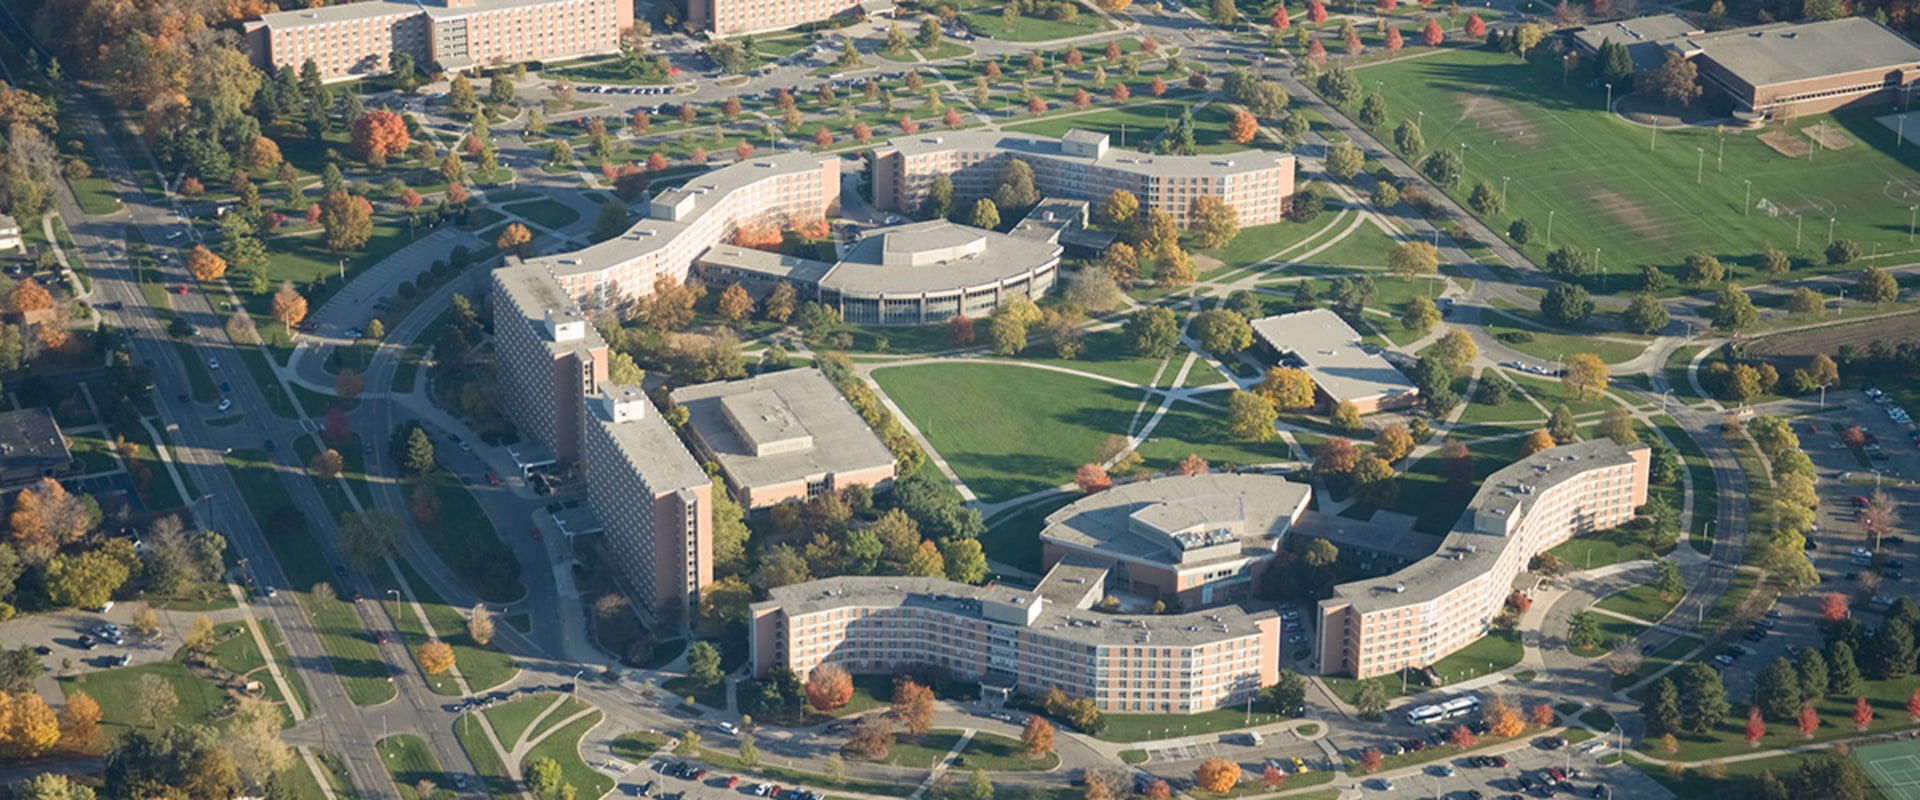 Housing Options for International Students at Michigan State University